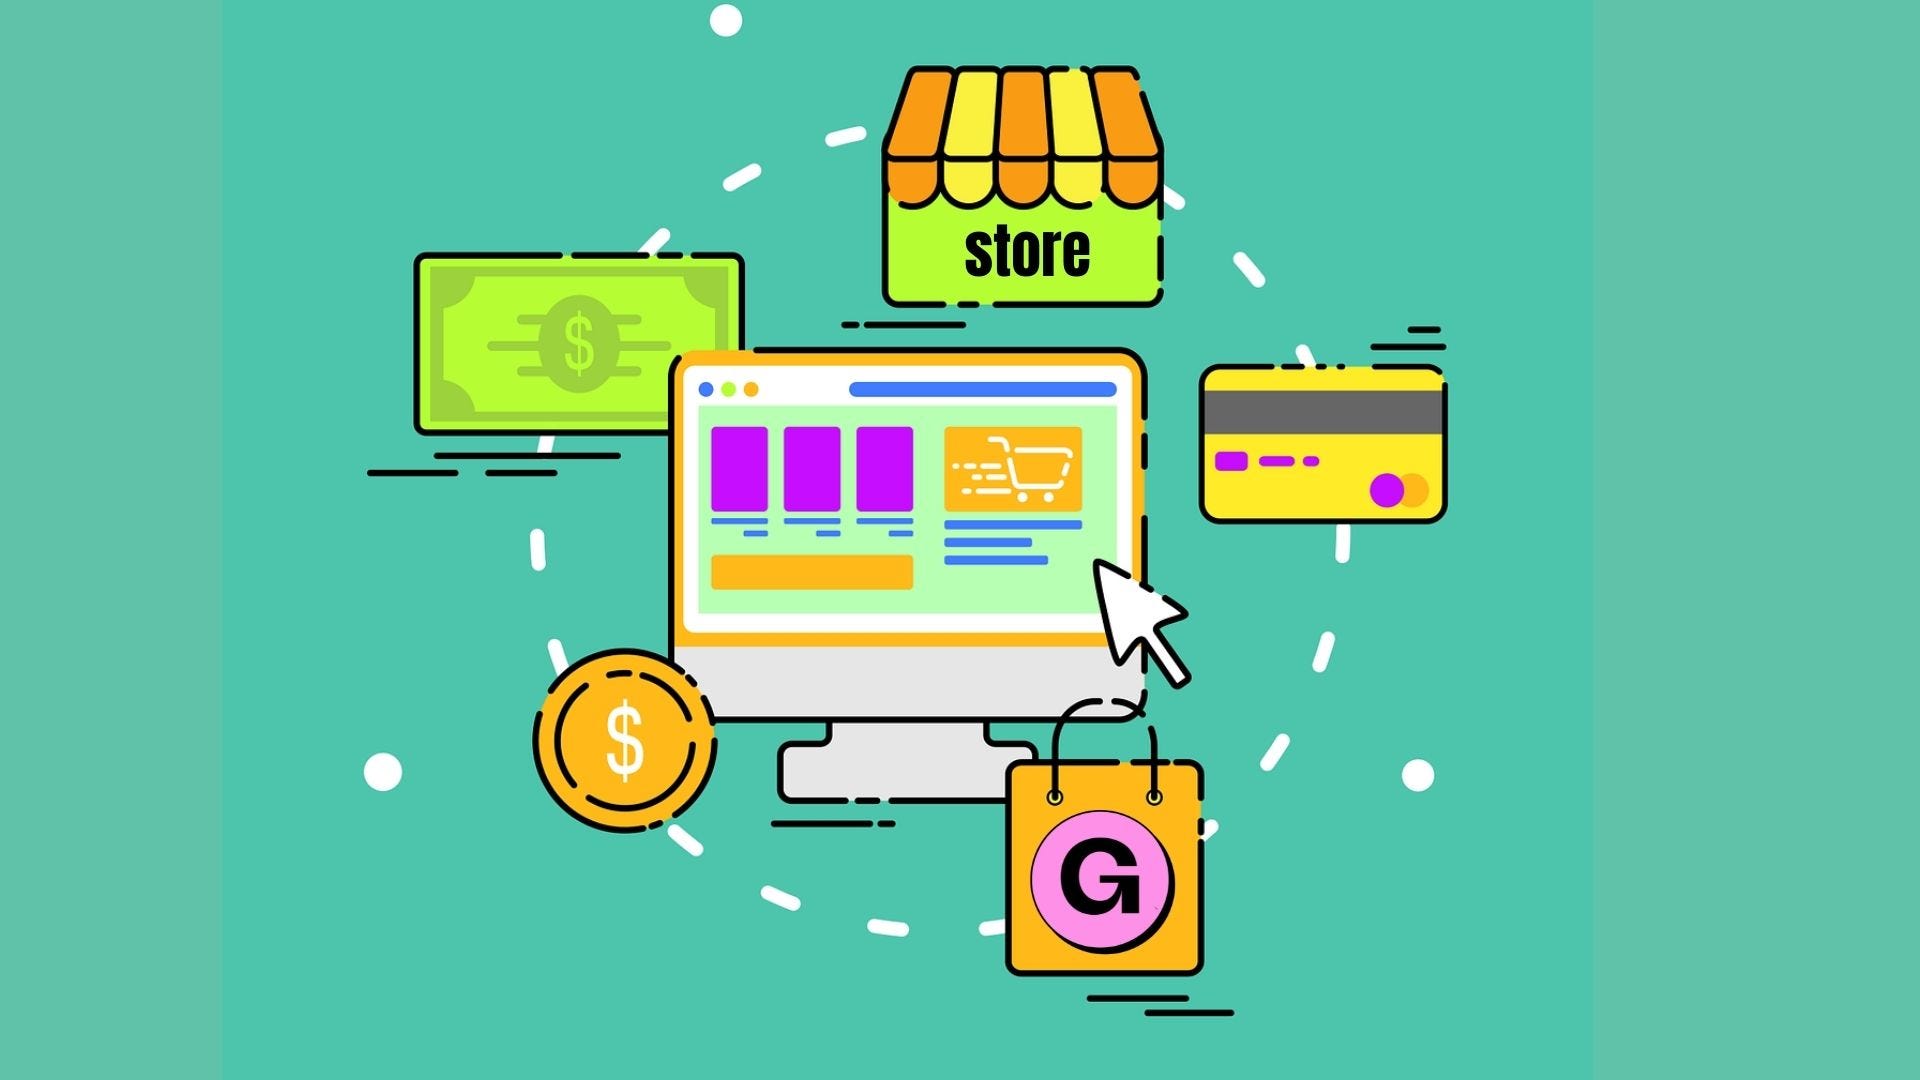 What Types of Products You Can Sell on Gumroad